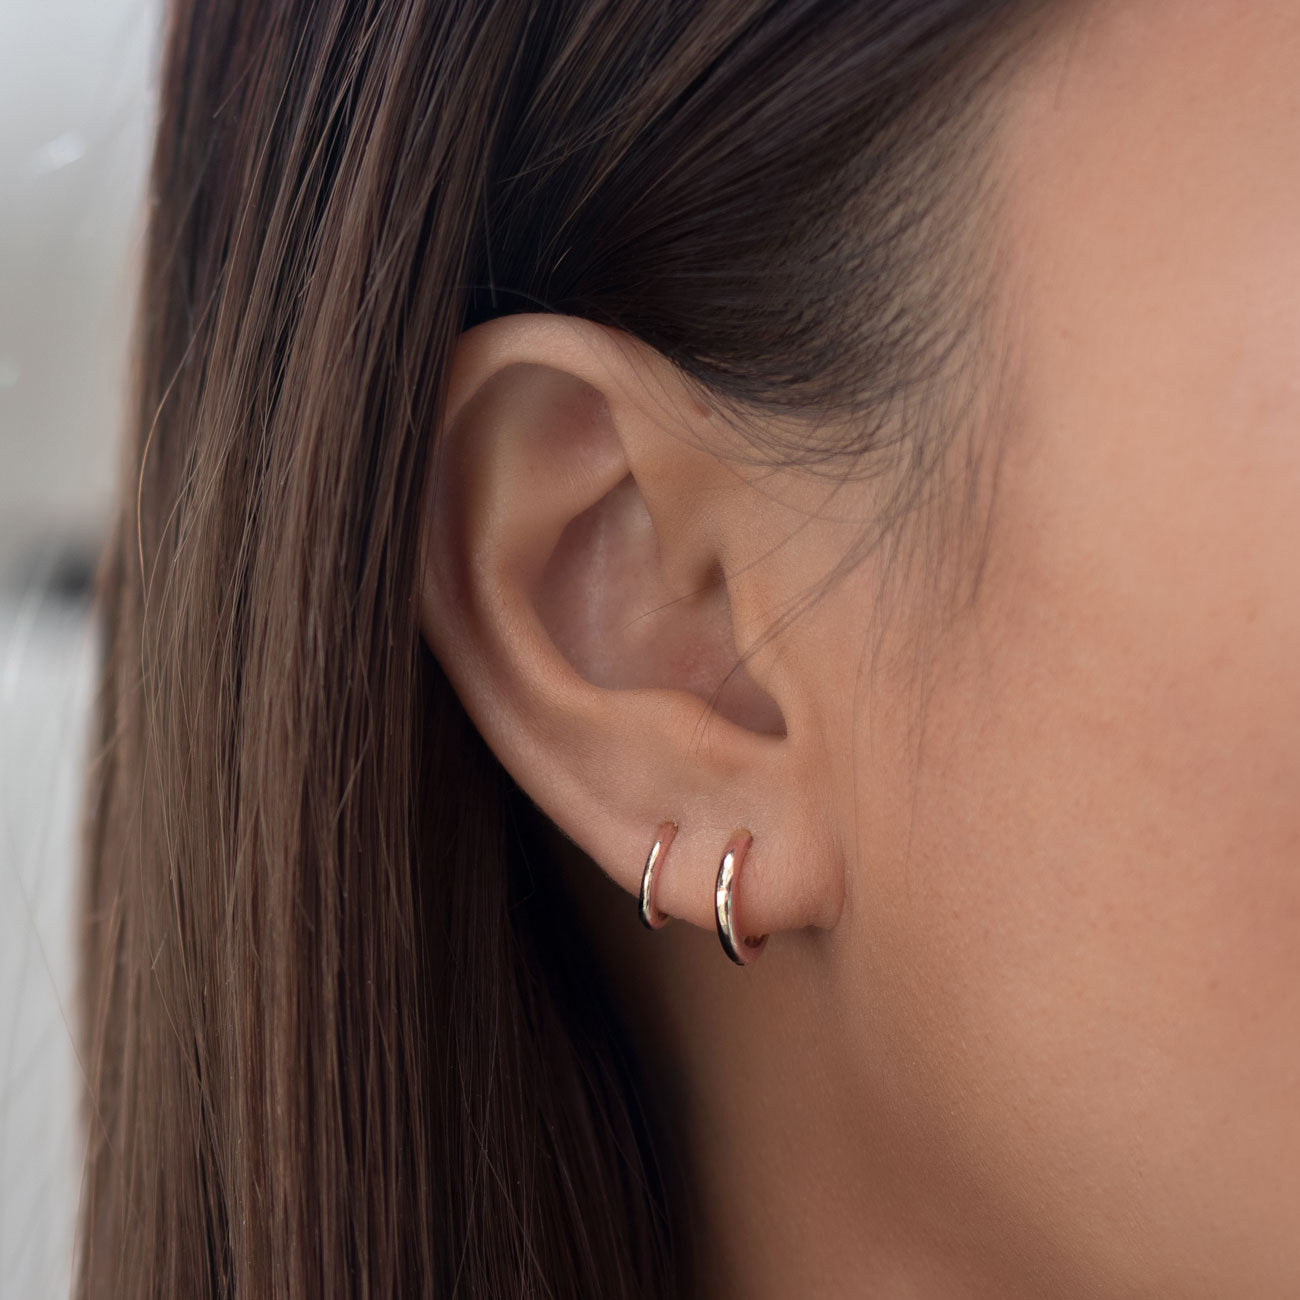 How are people “doing” hoops in helix piercings? Especially for sleeping? :  r/piercing